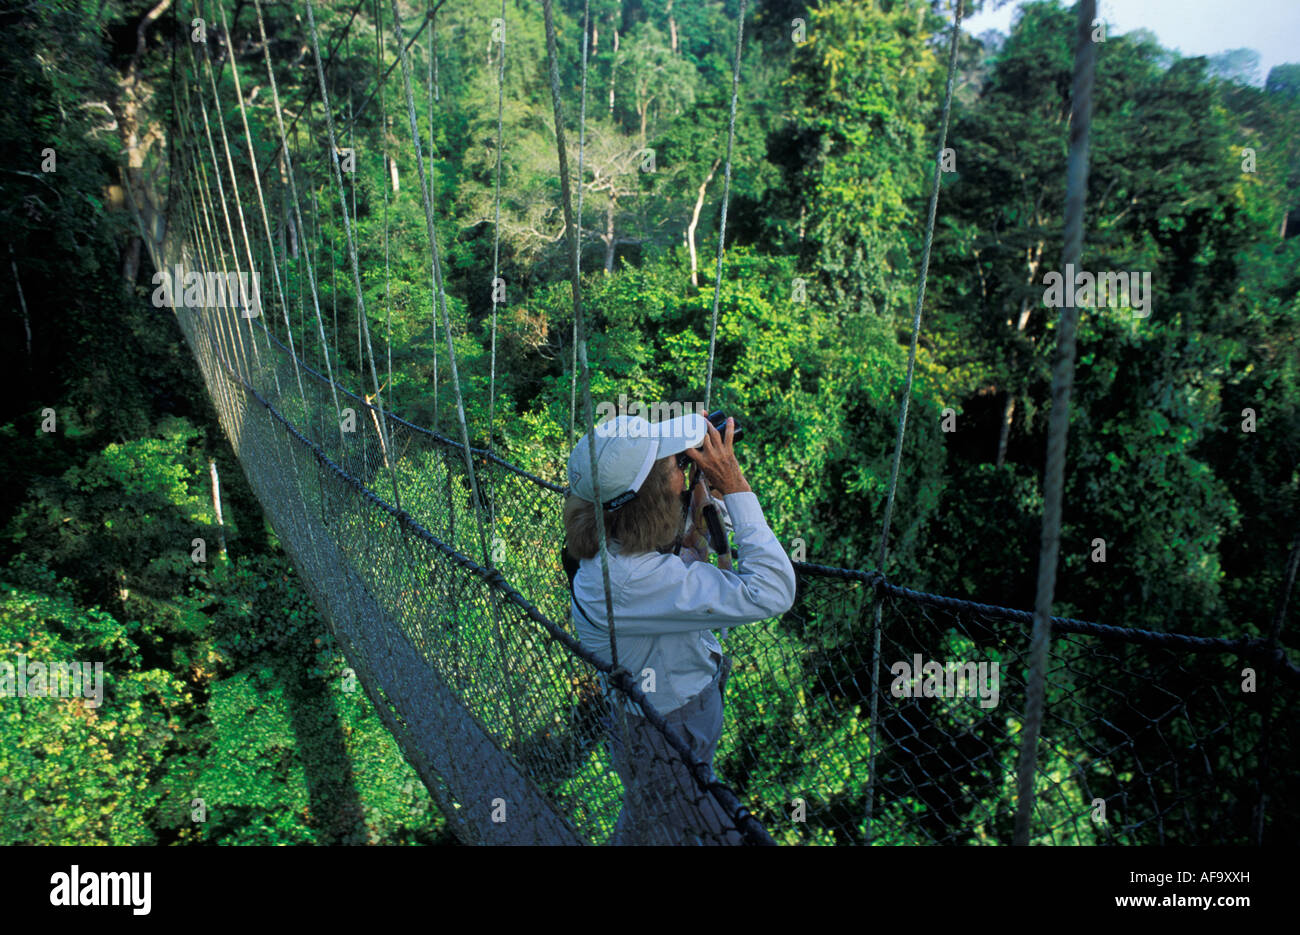 Tourist on aerial walkway in forest canopy ; Ghana Stock Photo